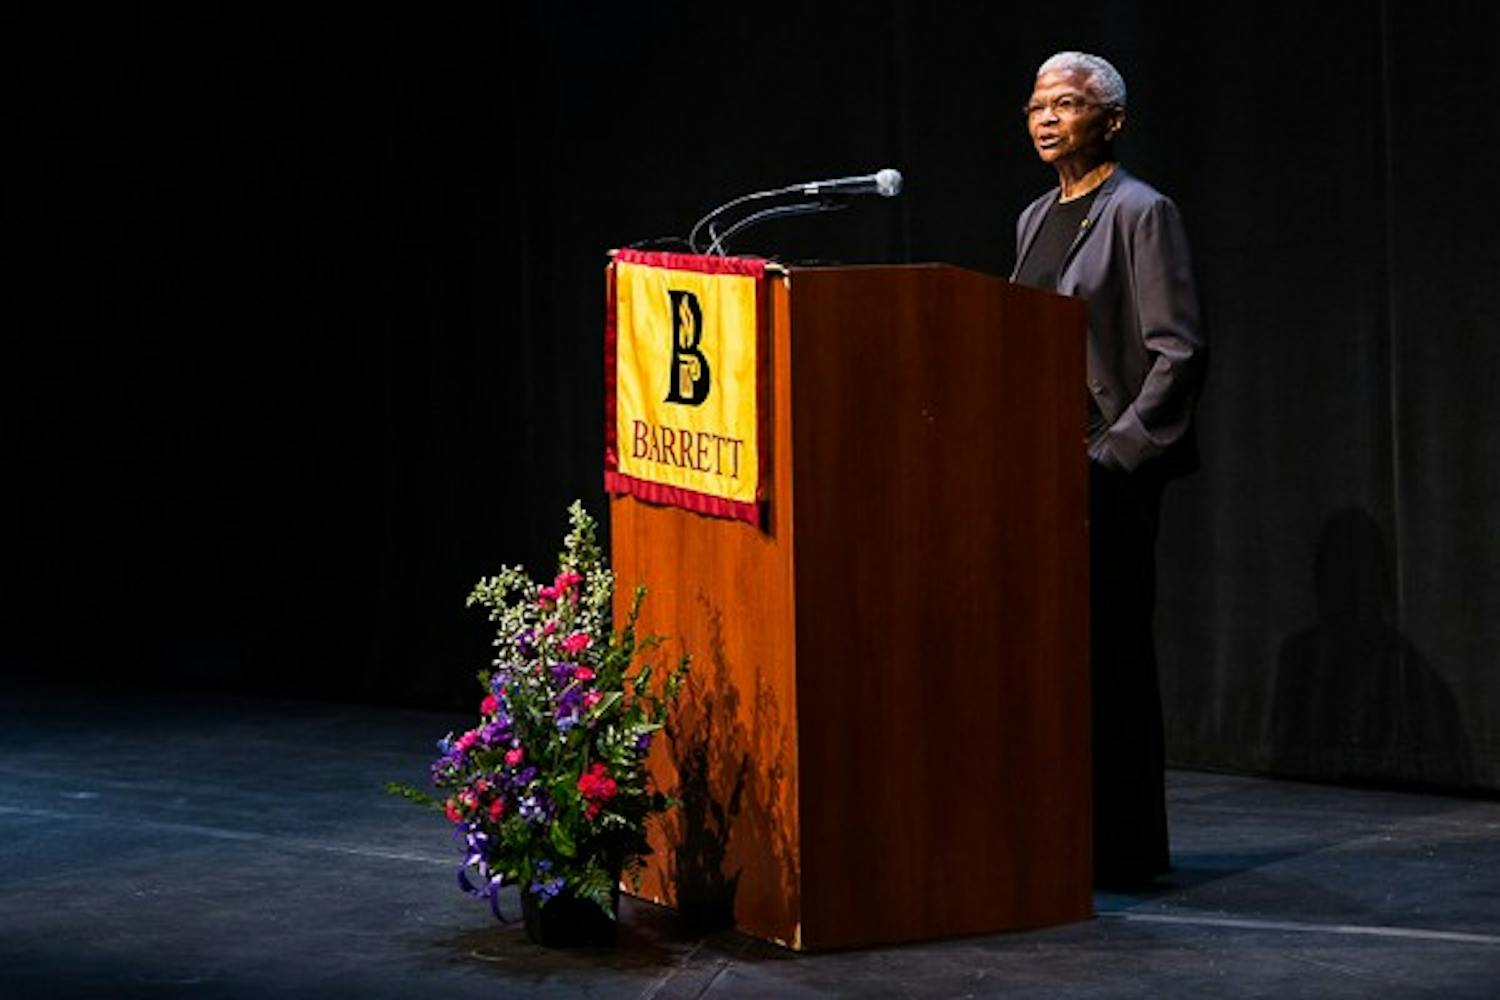 Dr. Mary Frances Berry speaks at the John J. Rhodes Lecture in Public Policy & American Institutions at the Galvin Playhouse on Wednesday, Feb. 25, 2015. In the lecture, presented by Barrett, the Honors College, Berry covered a variety of human and civil rights issues and challenged the audience to make a change for justice. (Daniel Kwon/The State Press)